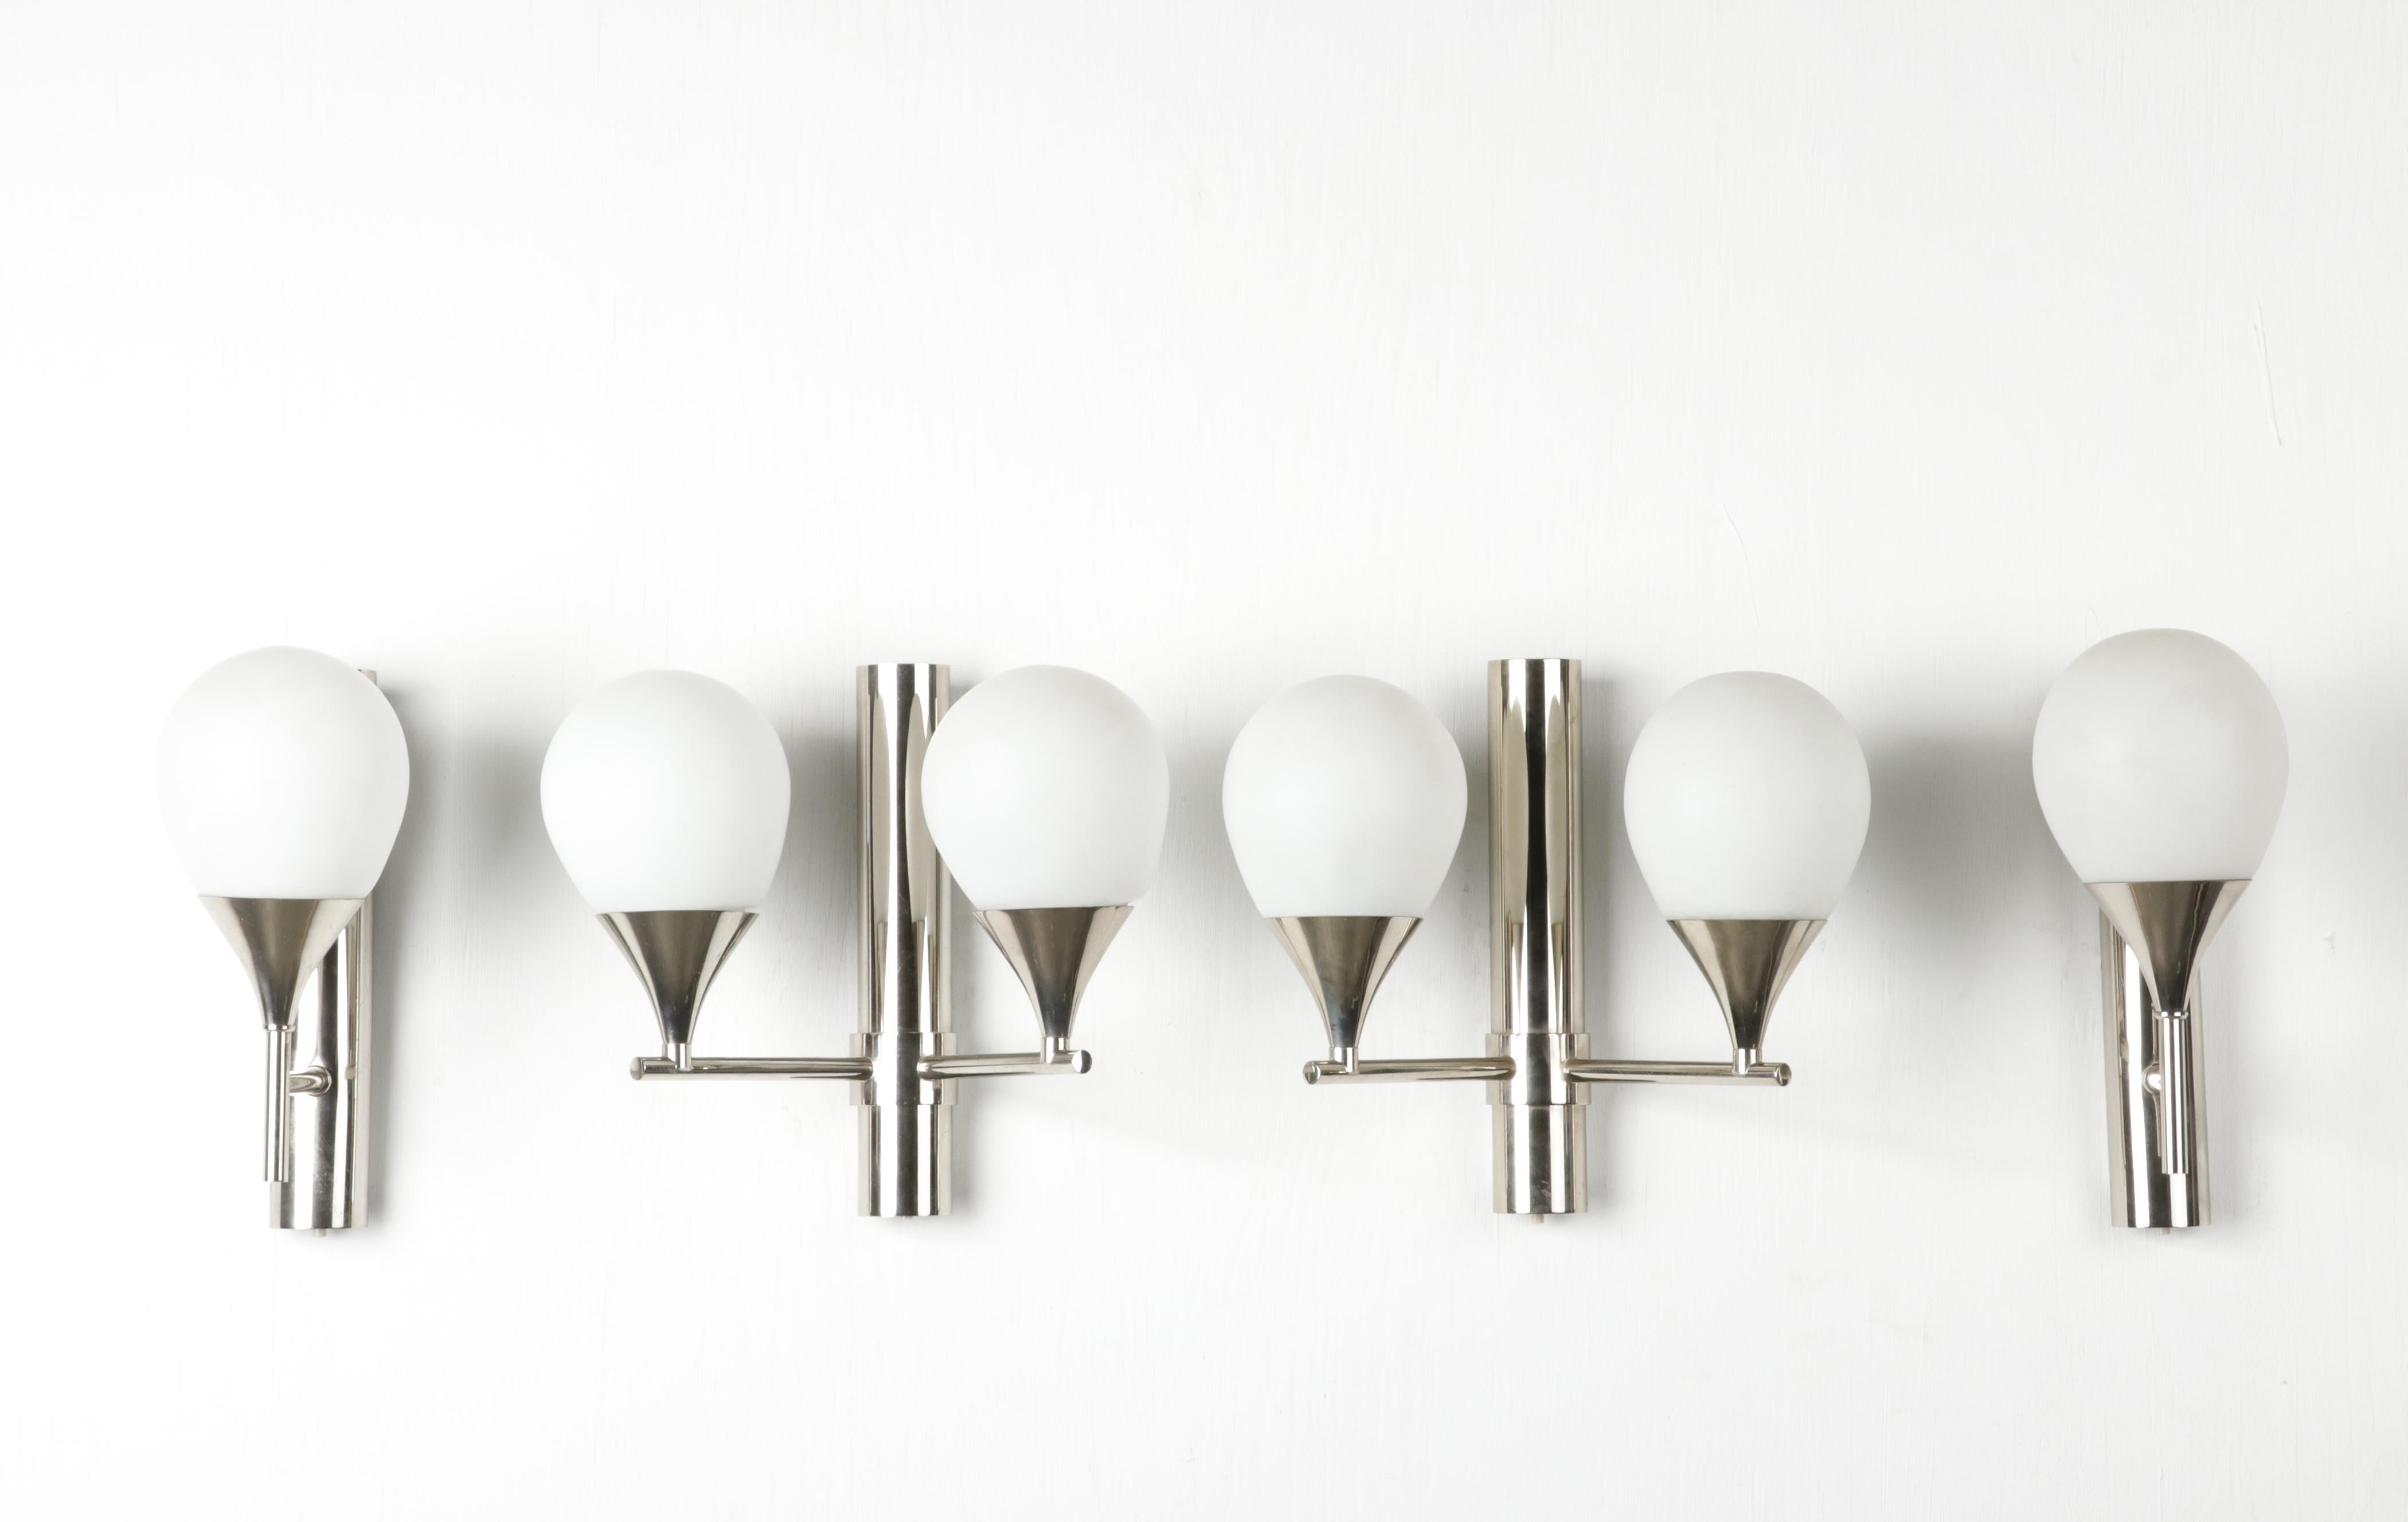 A set of Mid-Century Modern wall lamps, two with a single lamp and two with a double lamp. They were most likely made by the Belgian company S.A. Boulanger, they manufactured also a lot lightings for the Italian designers, such as Scilori. The